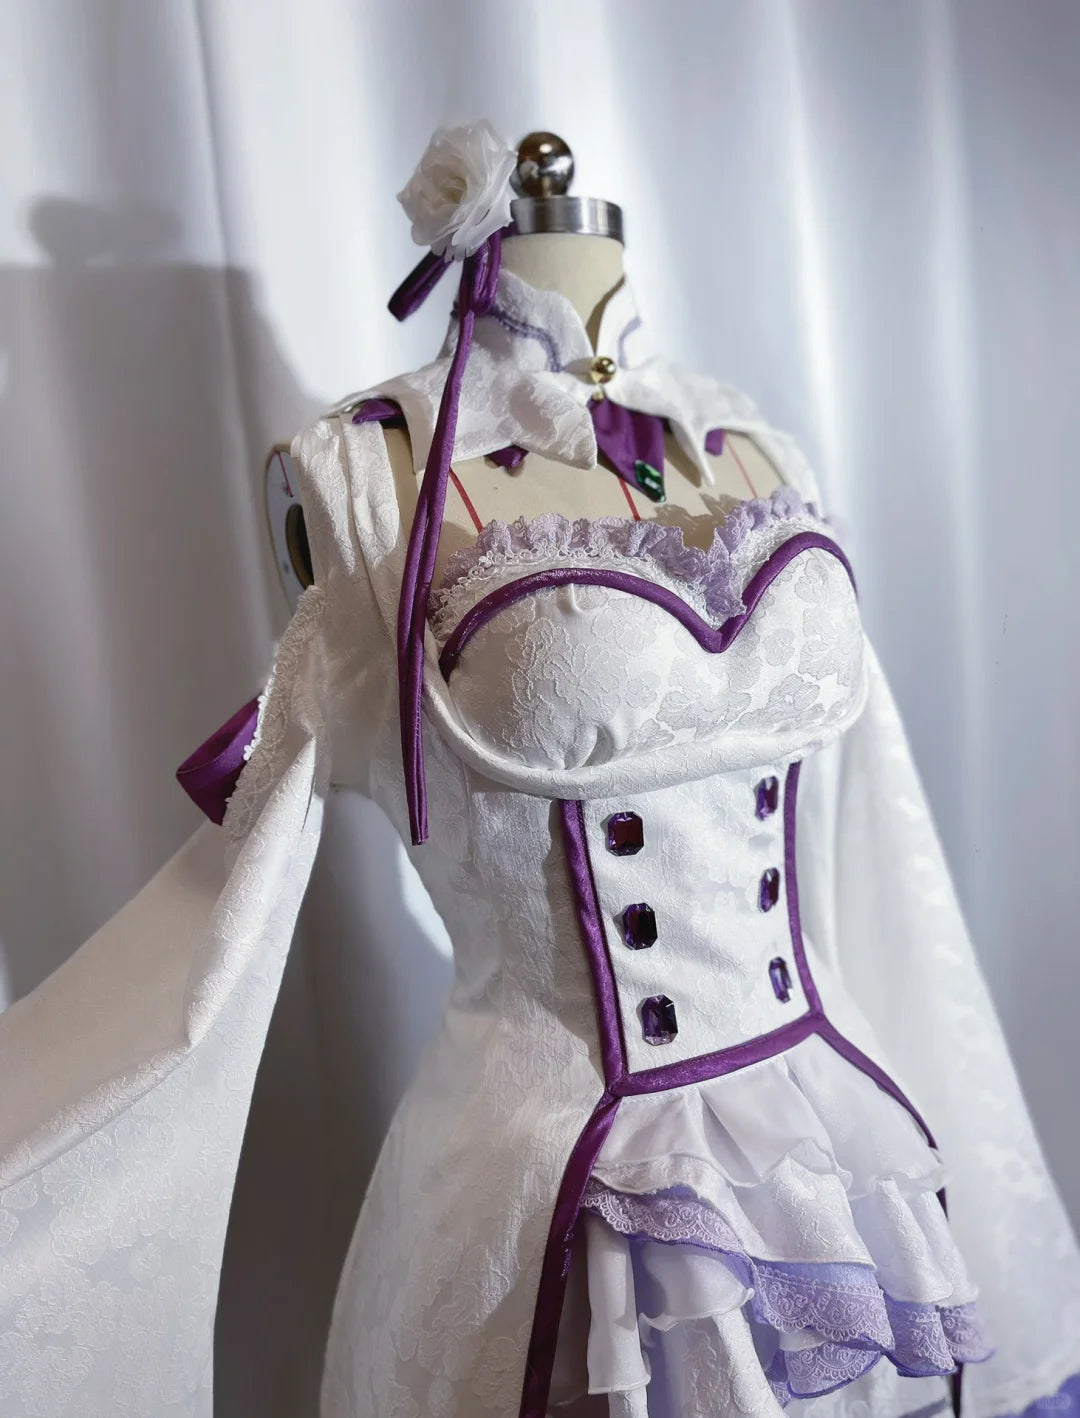 Hachimicos Re: Zero Starting Life in Another World Emilia Neon Cosplay Costume From Hachimicos